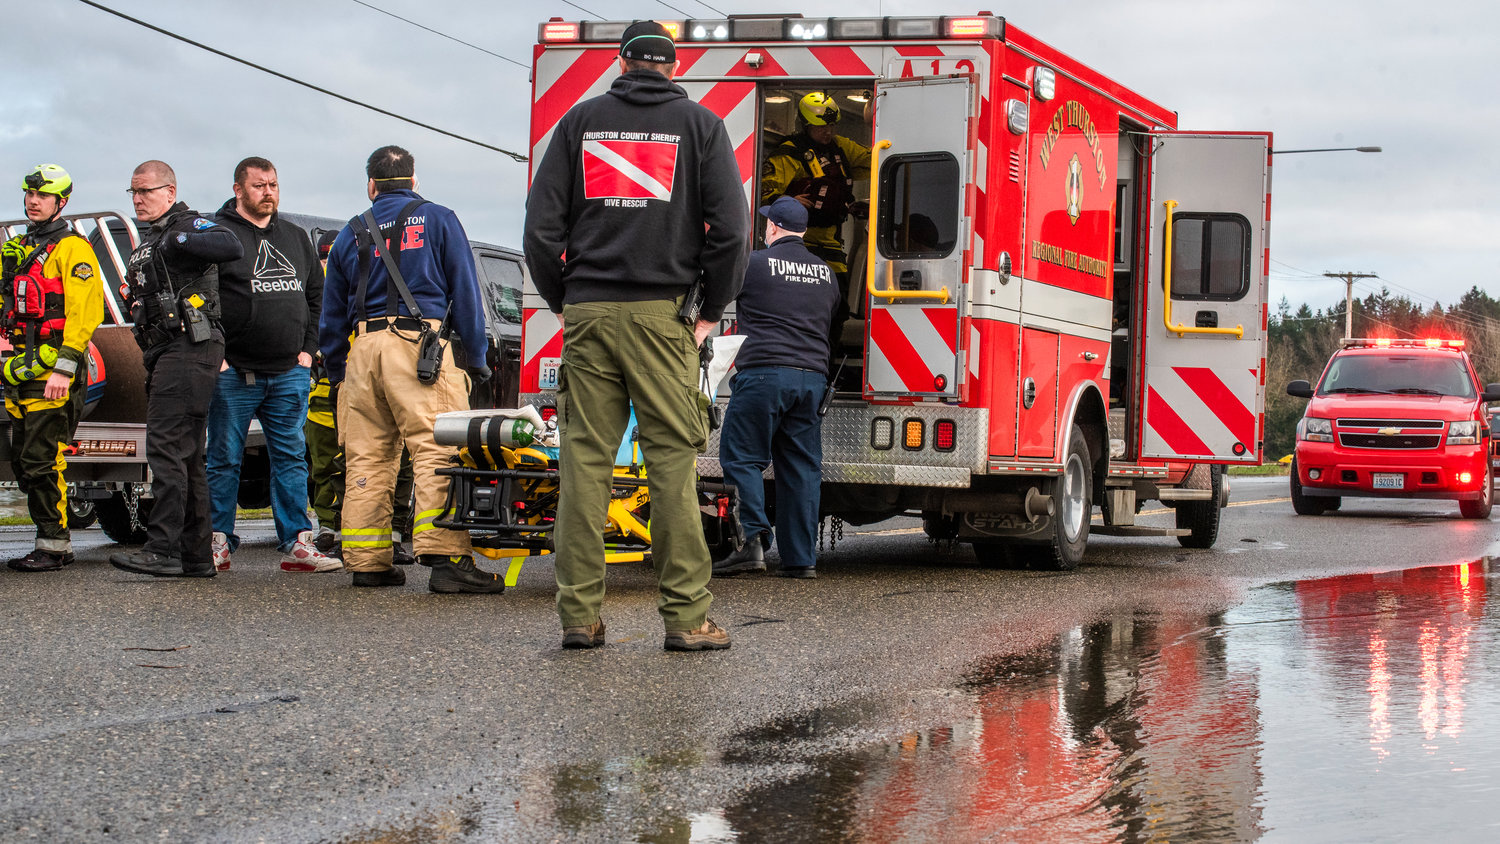 West Thurston Fire crews evaluate a crash victim with a head injury at the Moon Road intersection to U.S. Highway 12 in Rochester before having them enter an aid unit on a gurney to be transported to Providence St. Peter Hospital in Olympia through road closures Saturday afternoon.